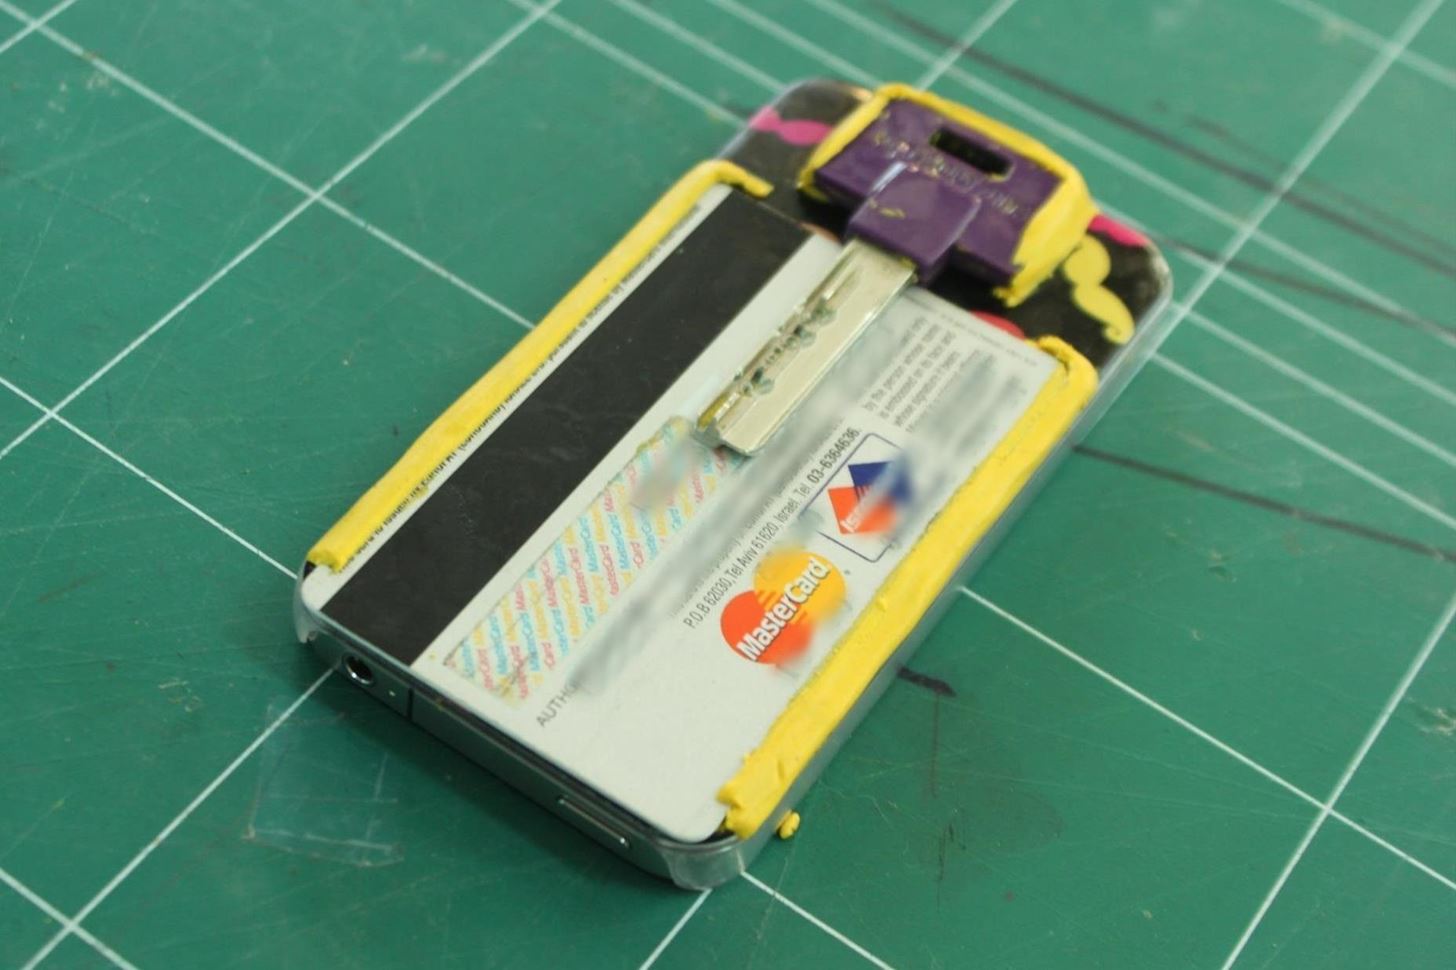 How to Turn Your Phone into a Wallet for Cards & Keys Using Sugru